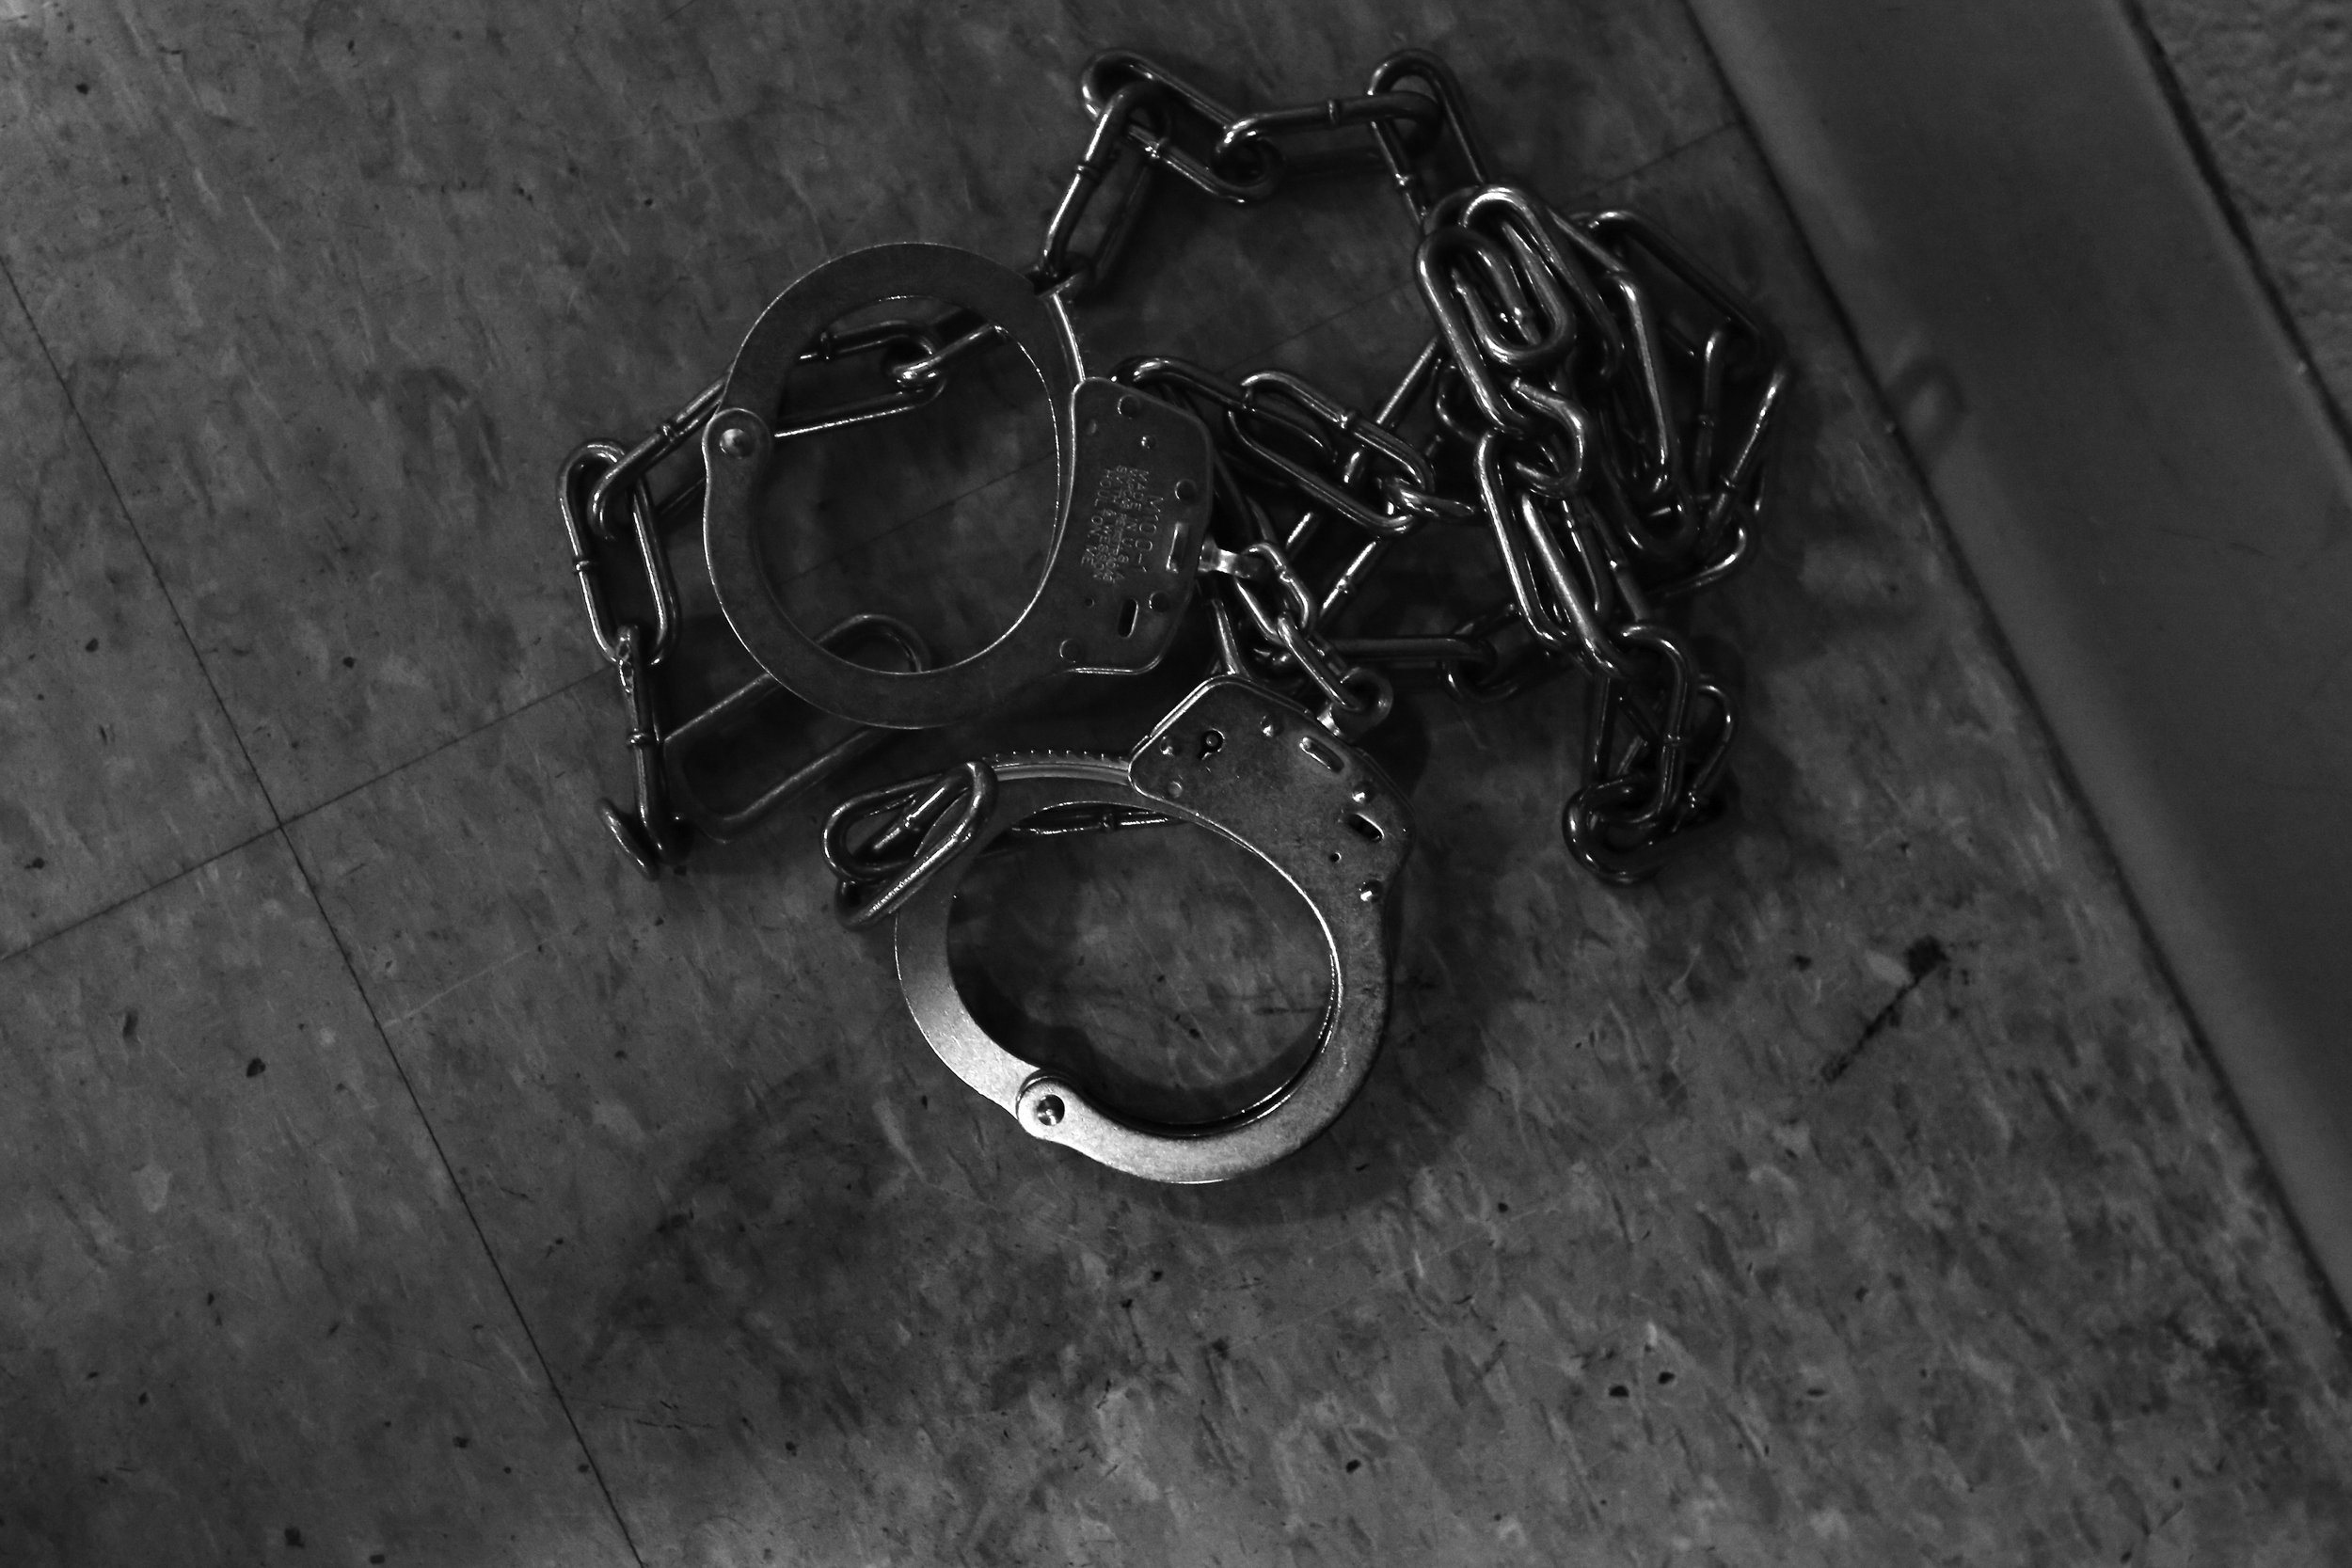  A pair of cuffs sits over bloodied linoleum tile in the control room of the booking area at the Lucas County Jail in downtown Toledo on Jan. 23, 2014.  